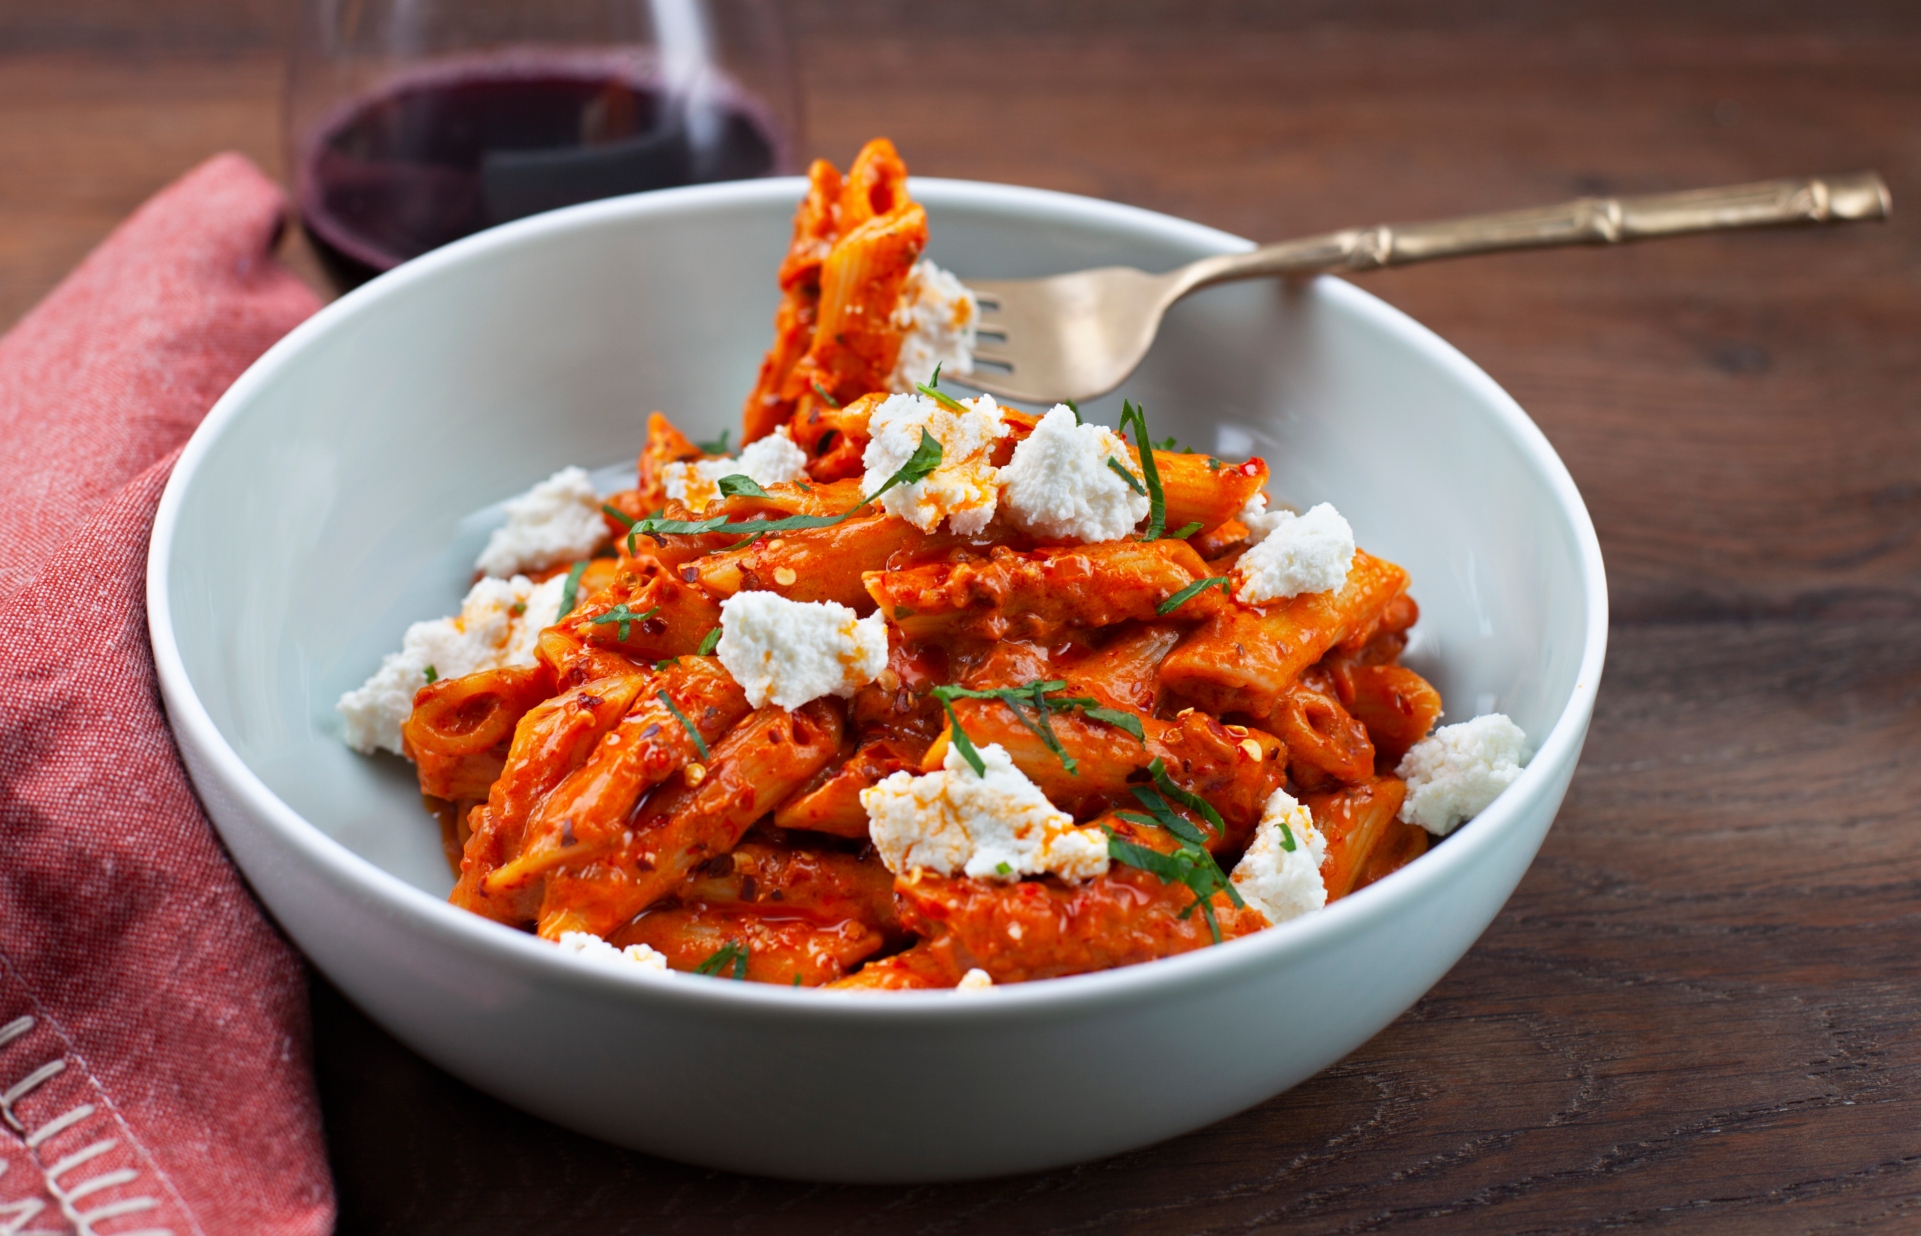 Spicy sausage and ricotta pasta